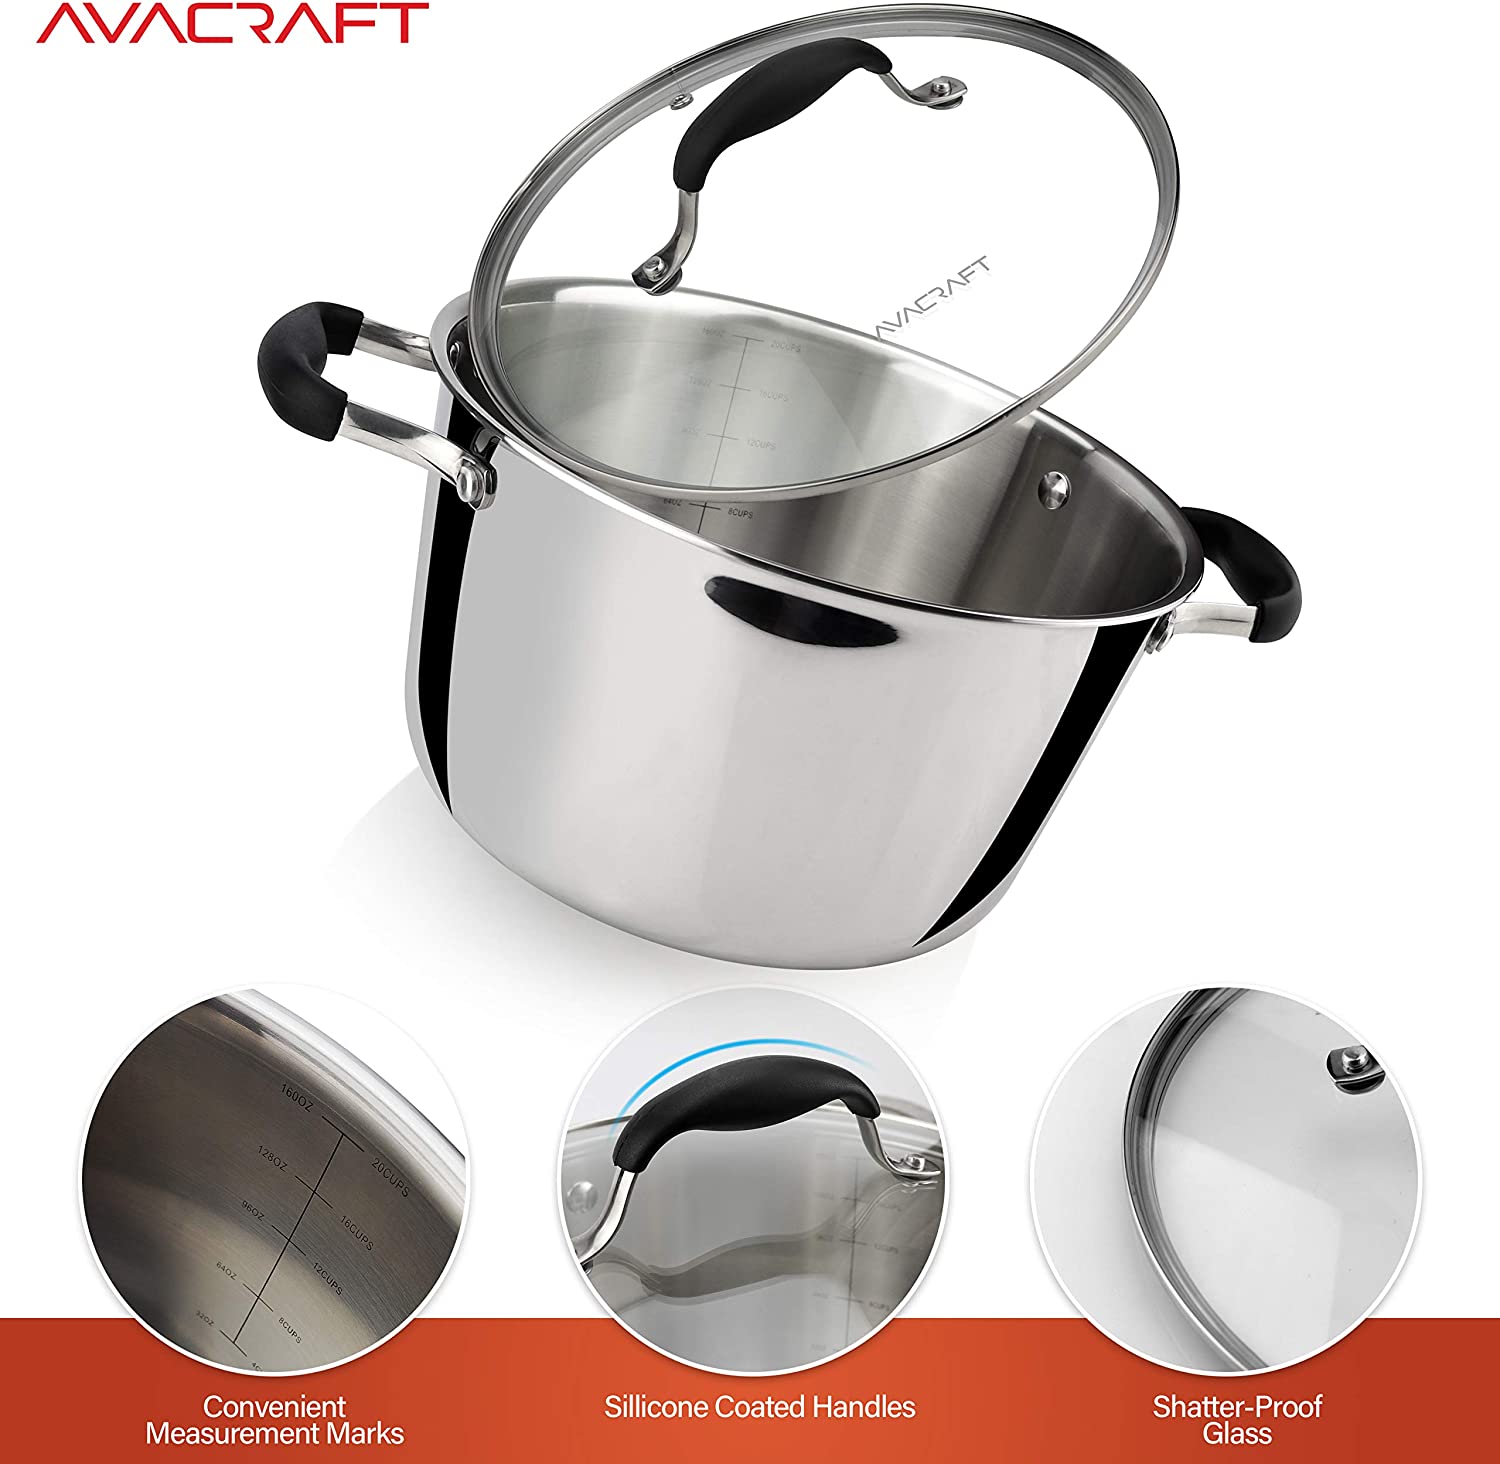 AVACRAFT 18/10 Stainless Steel Premium Multiclad Pots and Pans Set, 10